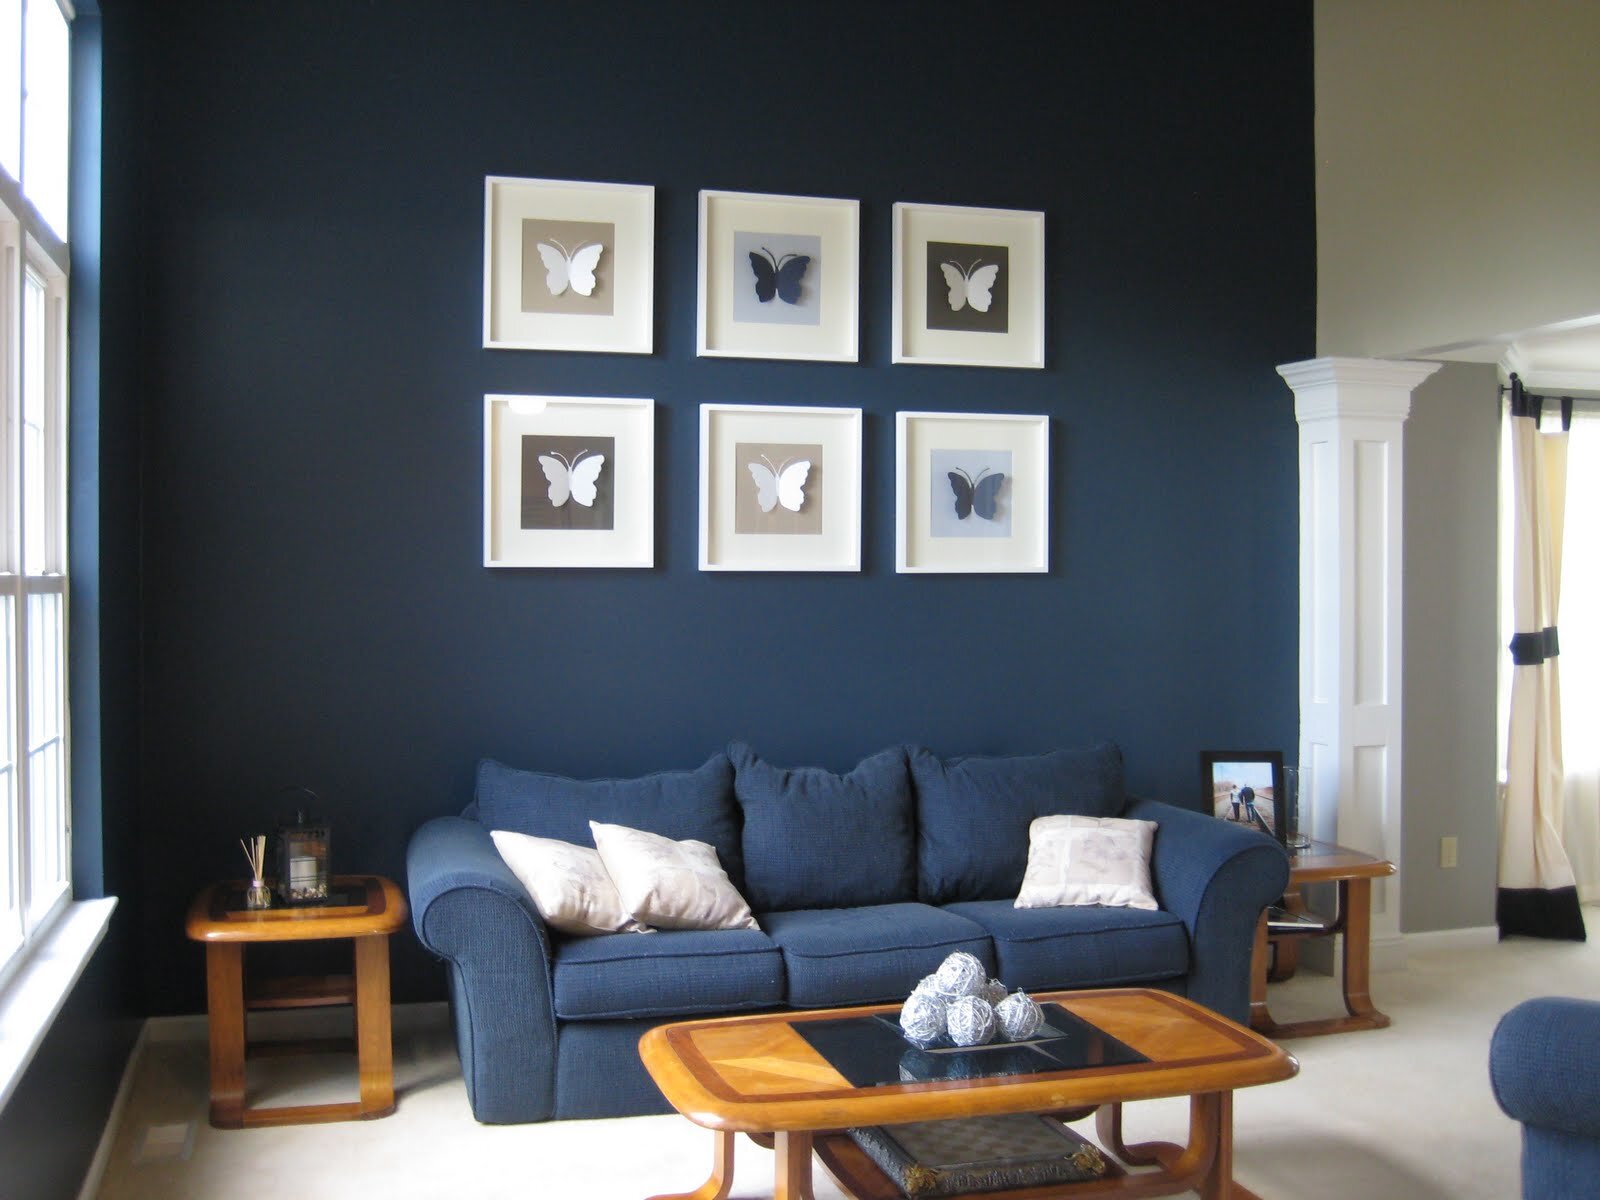 Painting Room With Hues Of Blue - www.homeworlddesign. com (14)